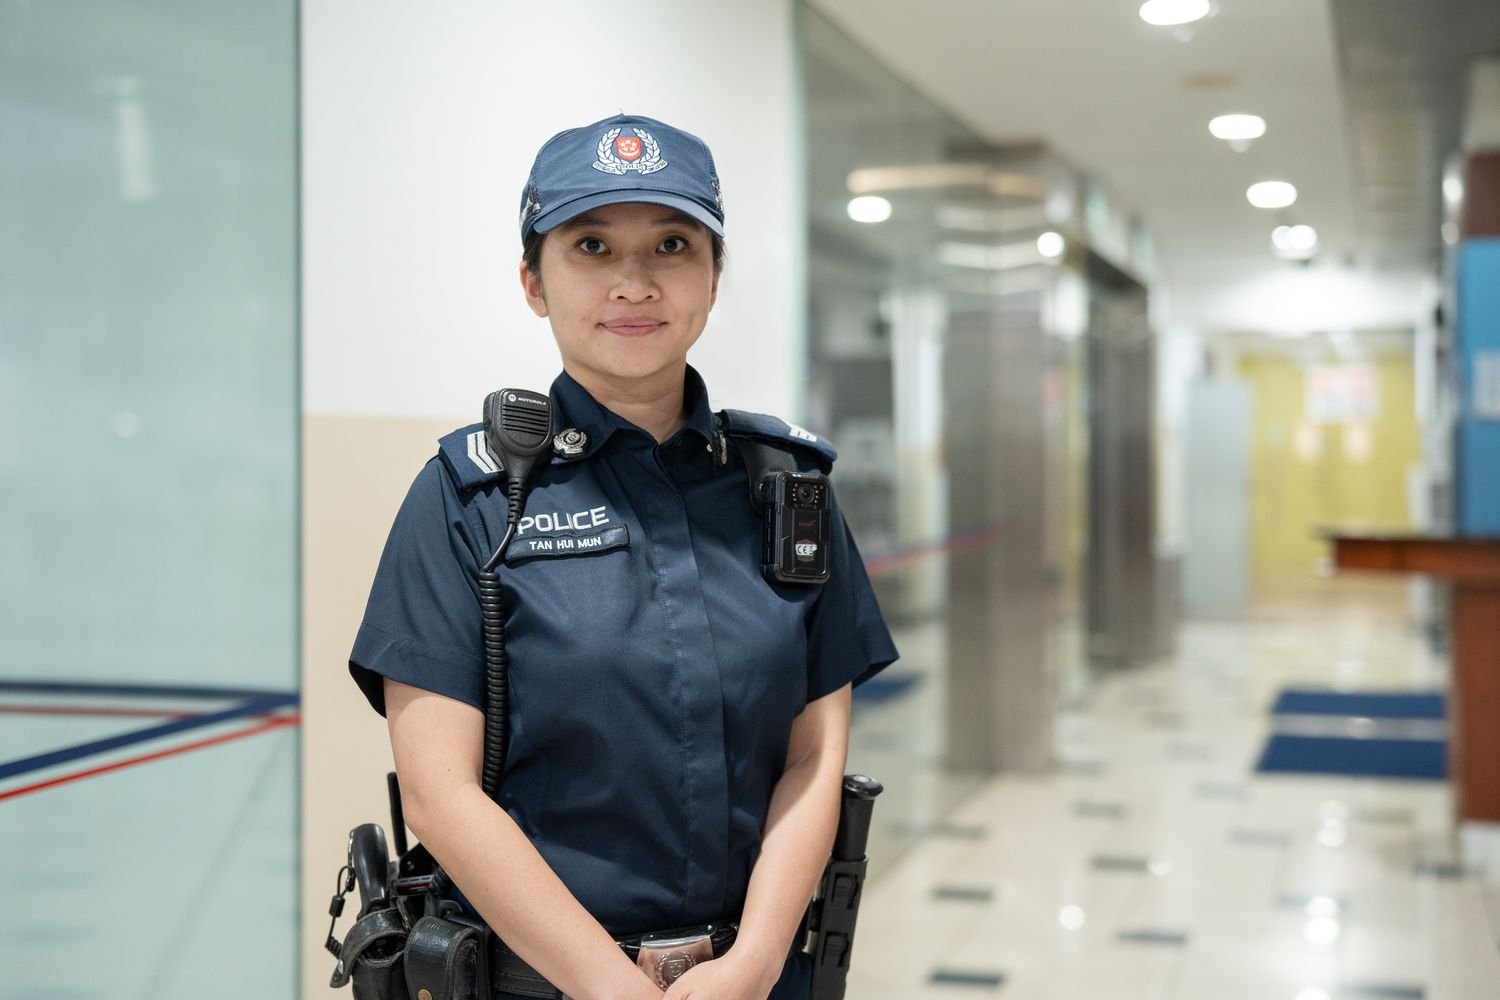 female police officer standing at the police station lobby